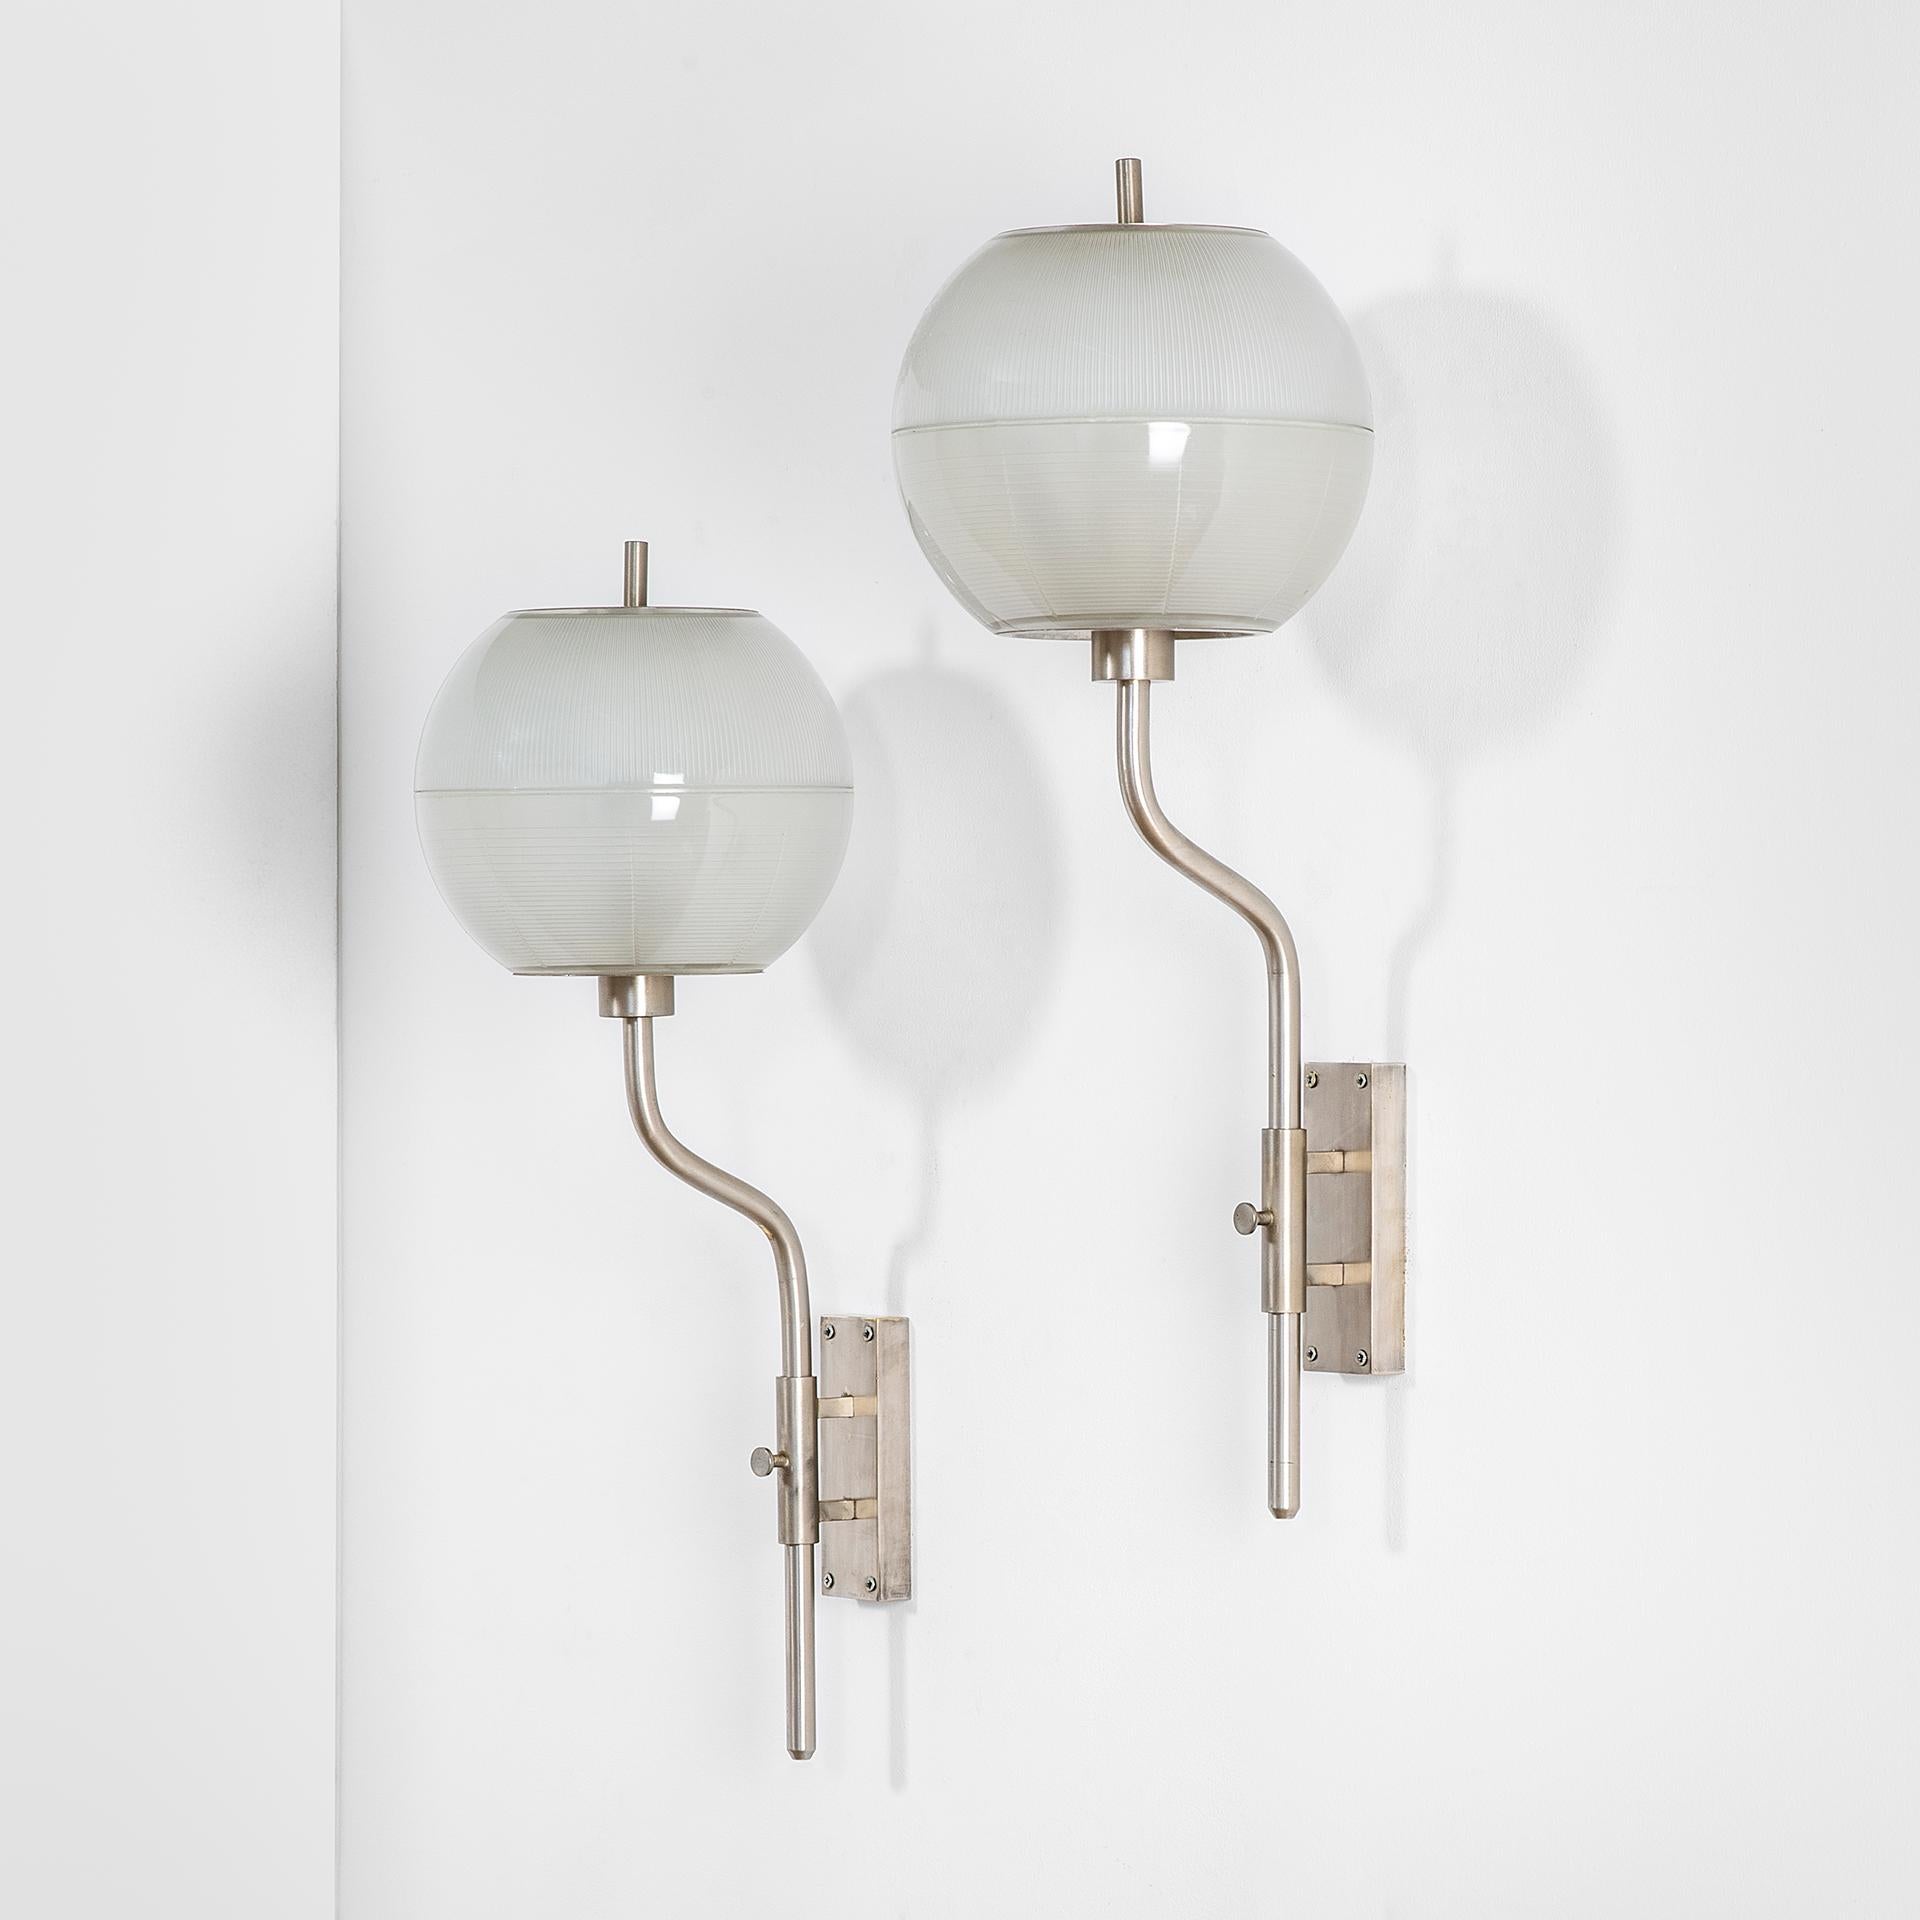 Italian 20th Century Stilnovo Pair of Wall Lamps with Glass Diffusers and Chromed Metal For Sale